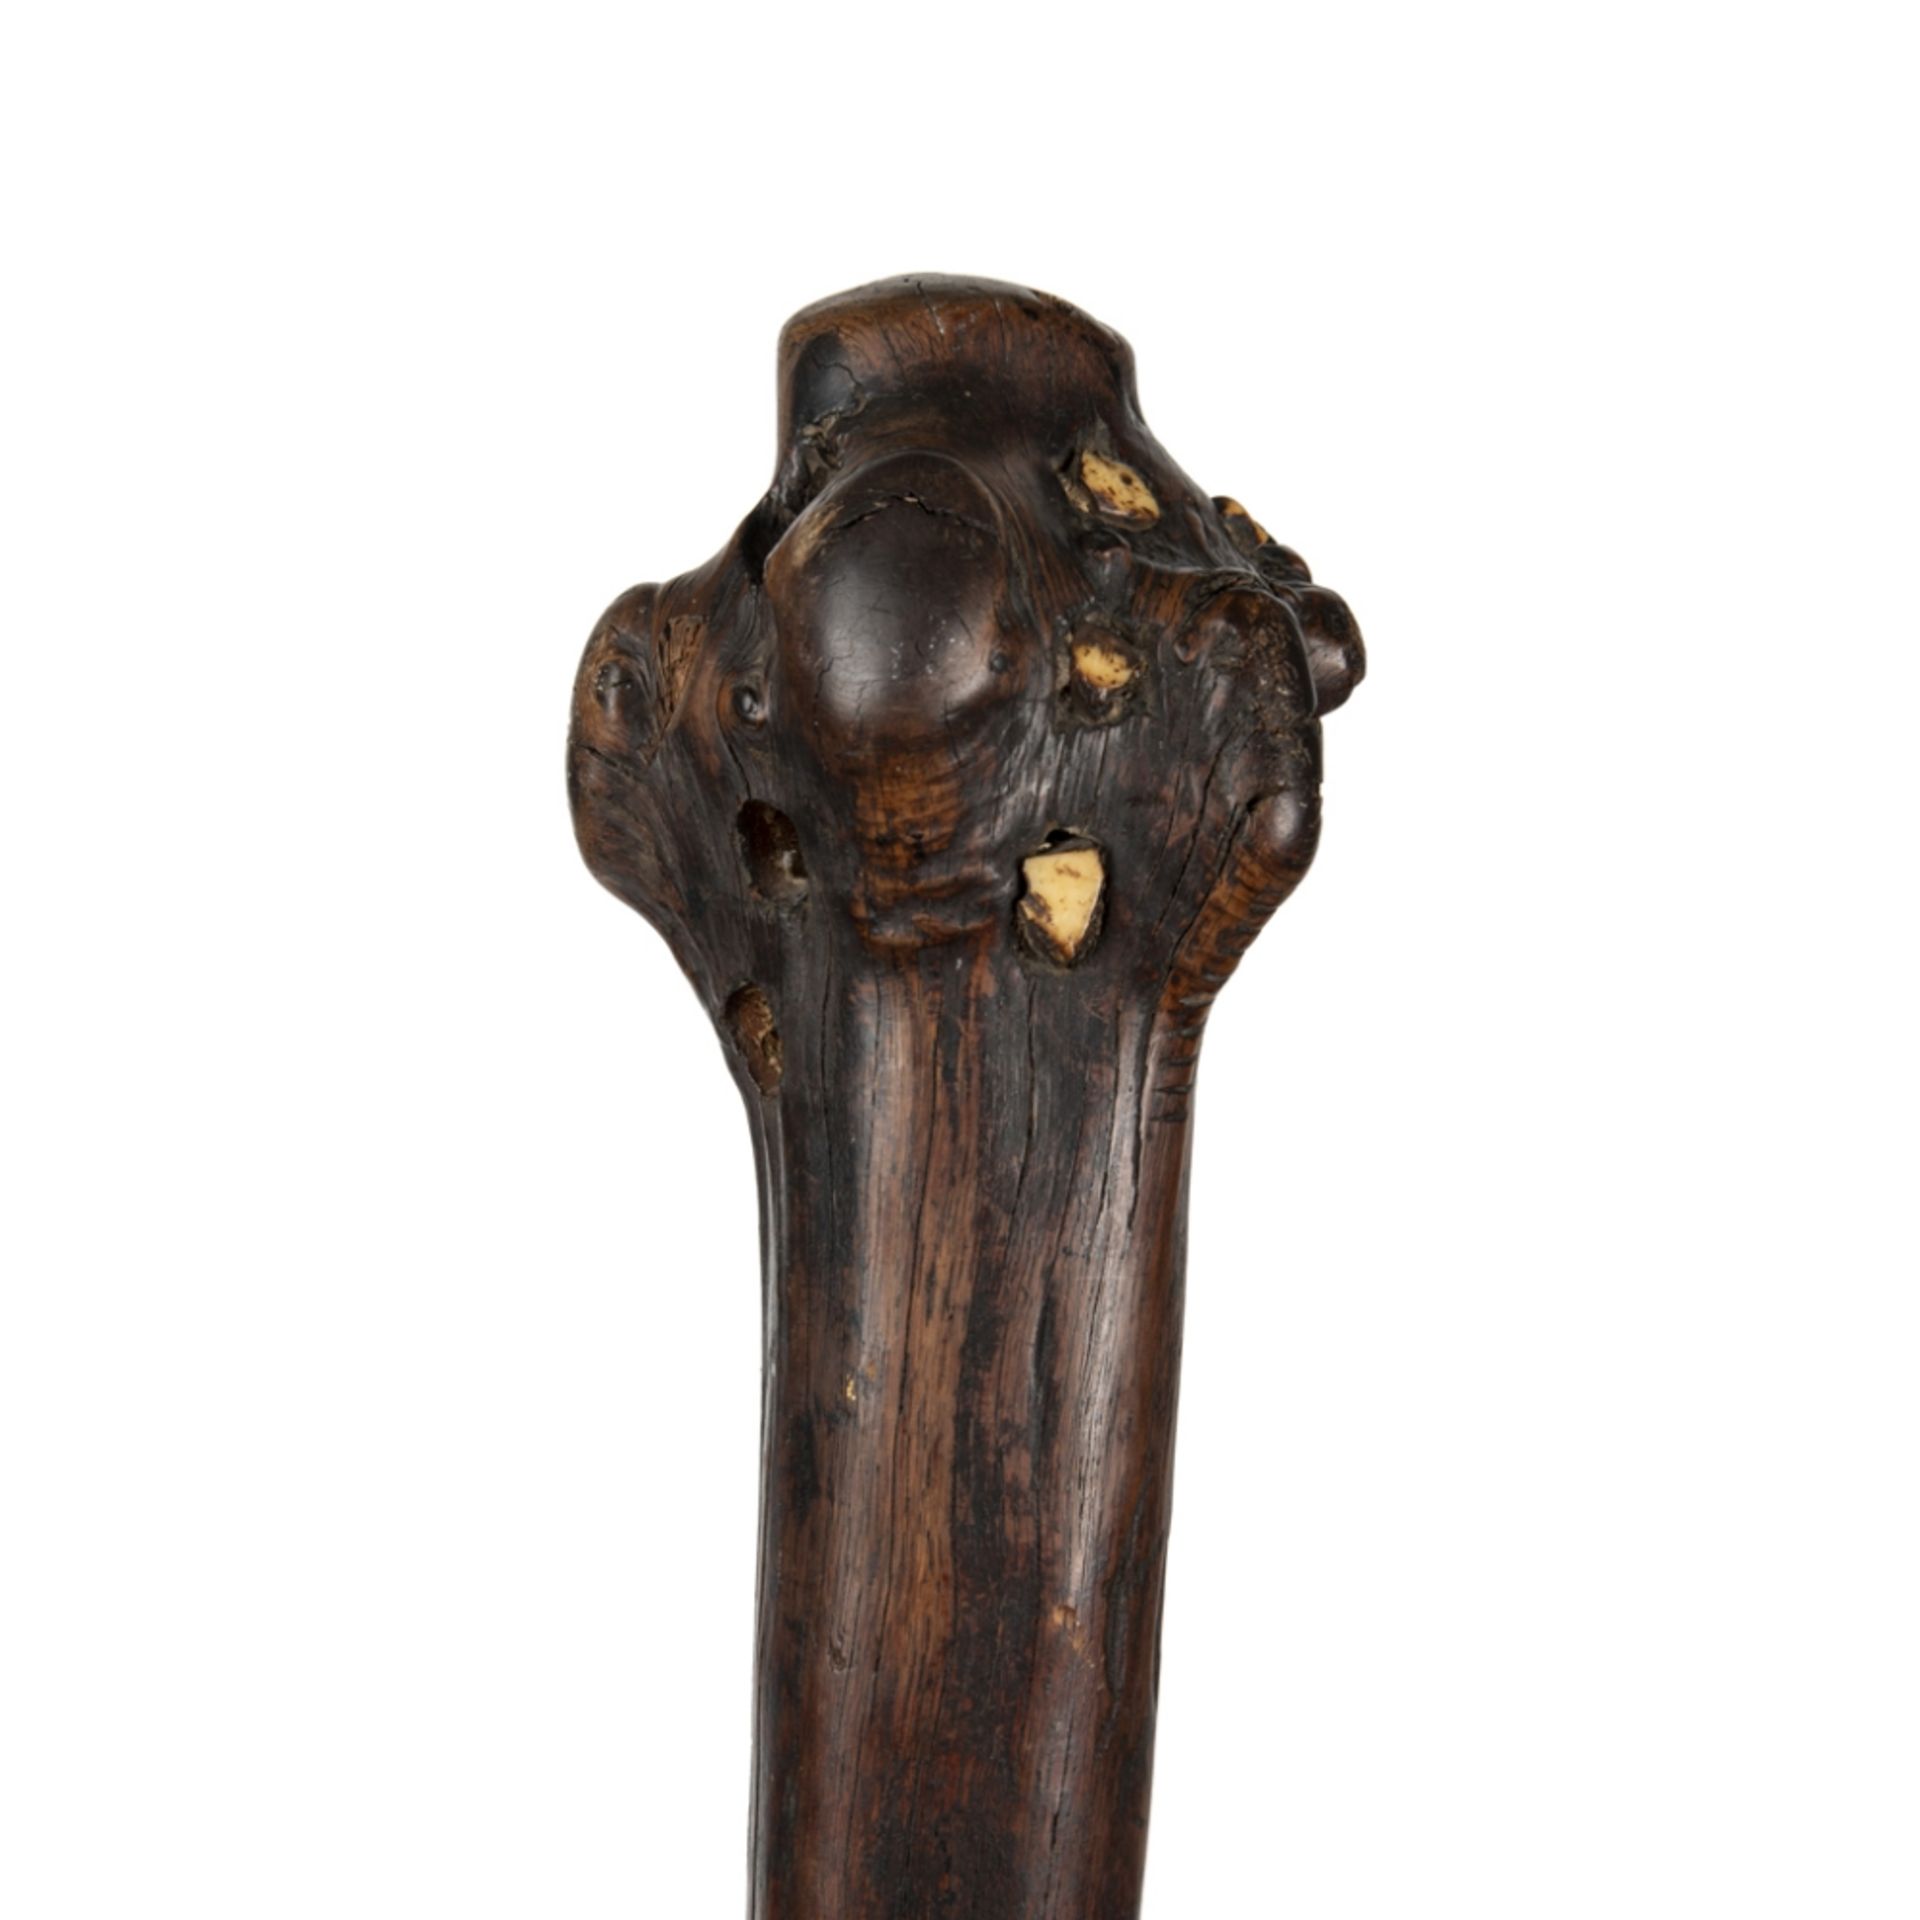 ROOTSTOCK CLUBFIJI, LATE 18TH CENTURY carved wood and marine ivory, the handle with tavatava grip, - Image 3 of 4